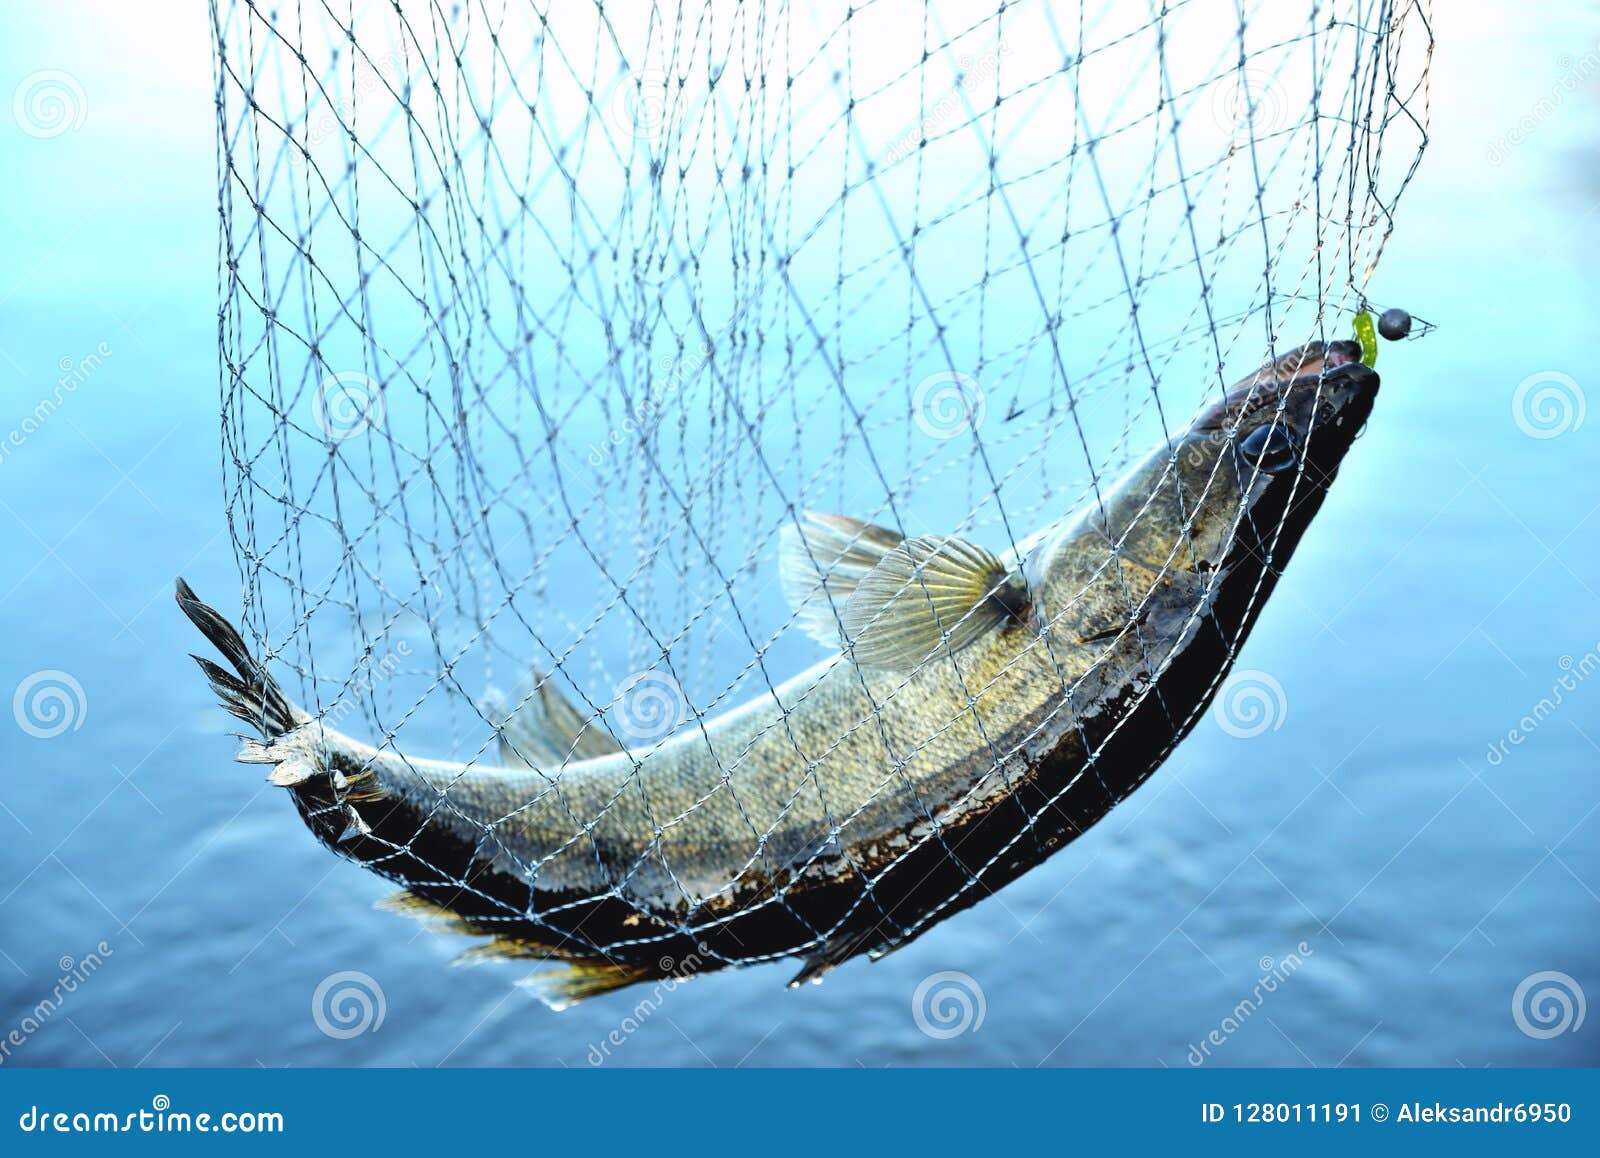 Fish Caught in the Net Against the Background of Water, Zander